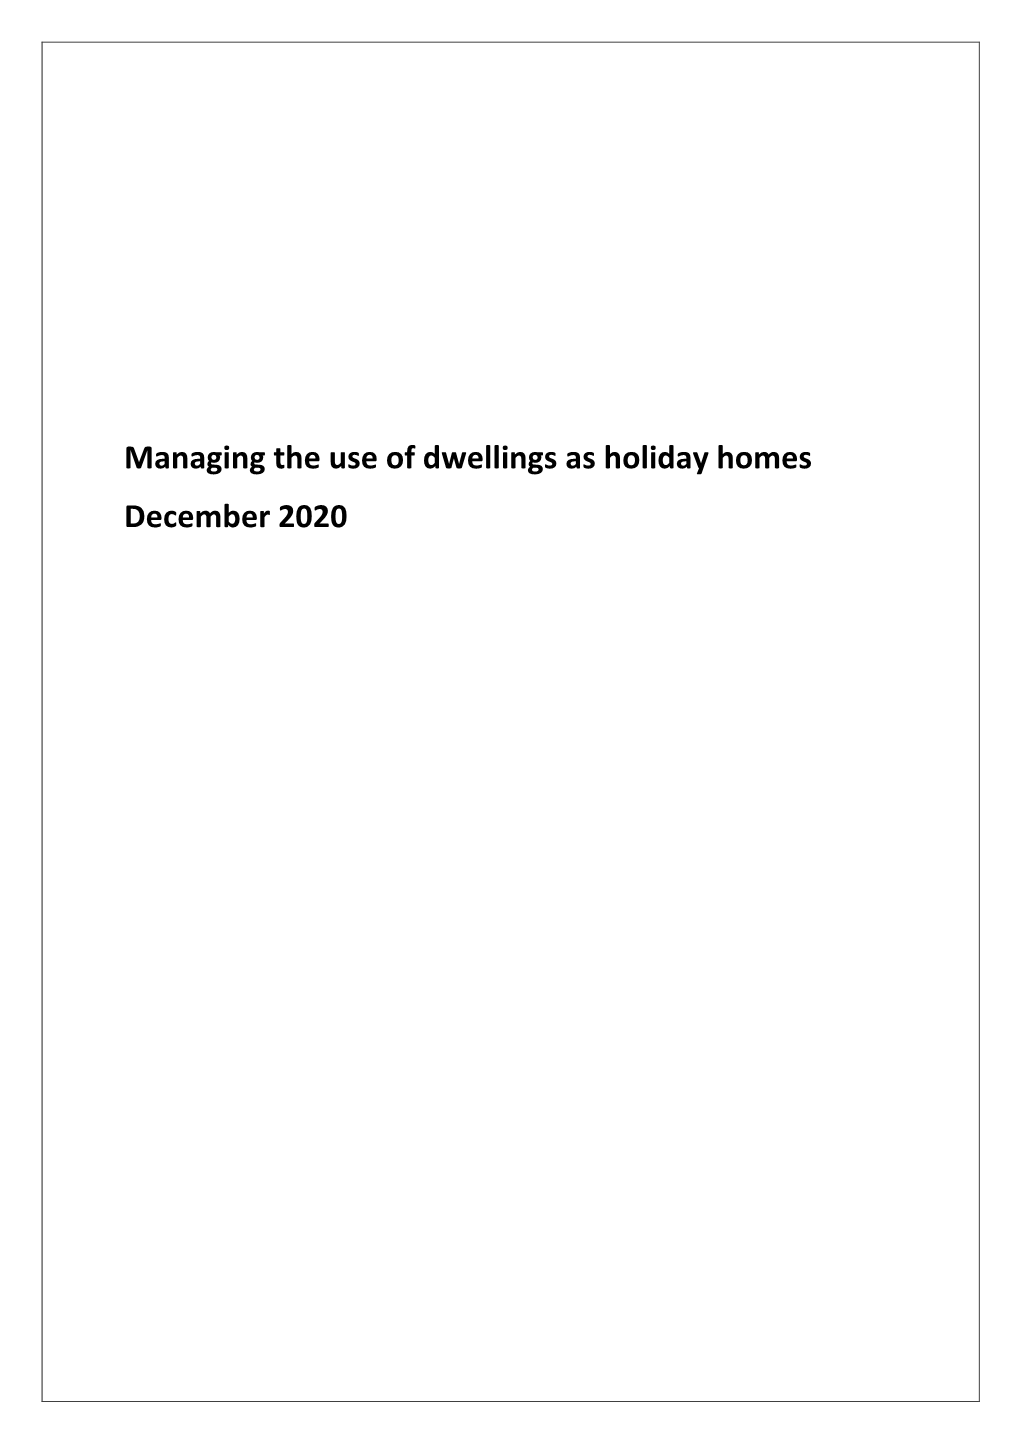 Managing the Use of Dwellings As Holiday Homes December 2020